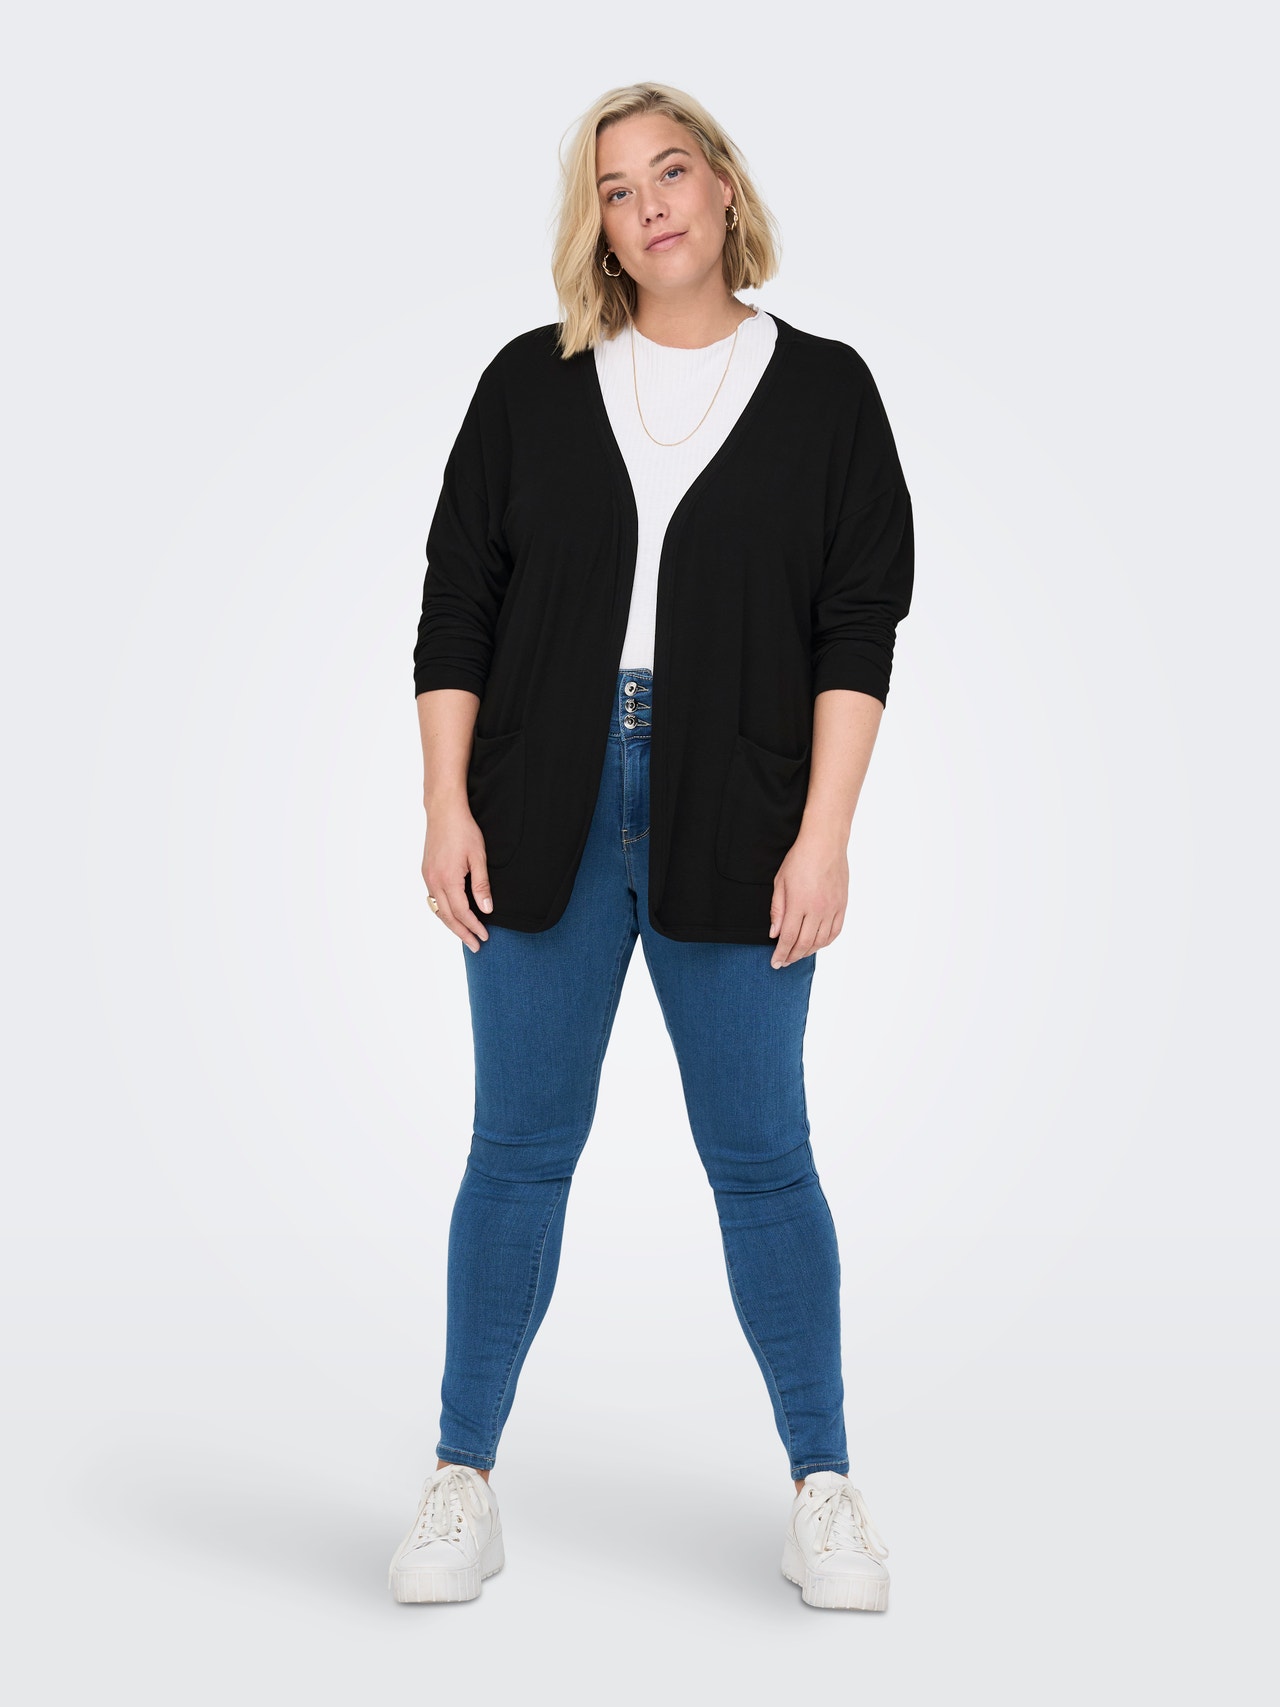 ONLY O-Neck Dropped shoulders Cardigan -Black - 15290338